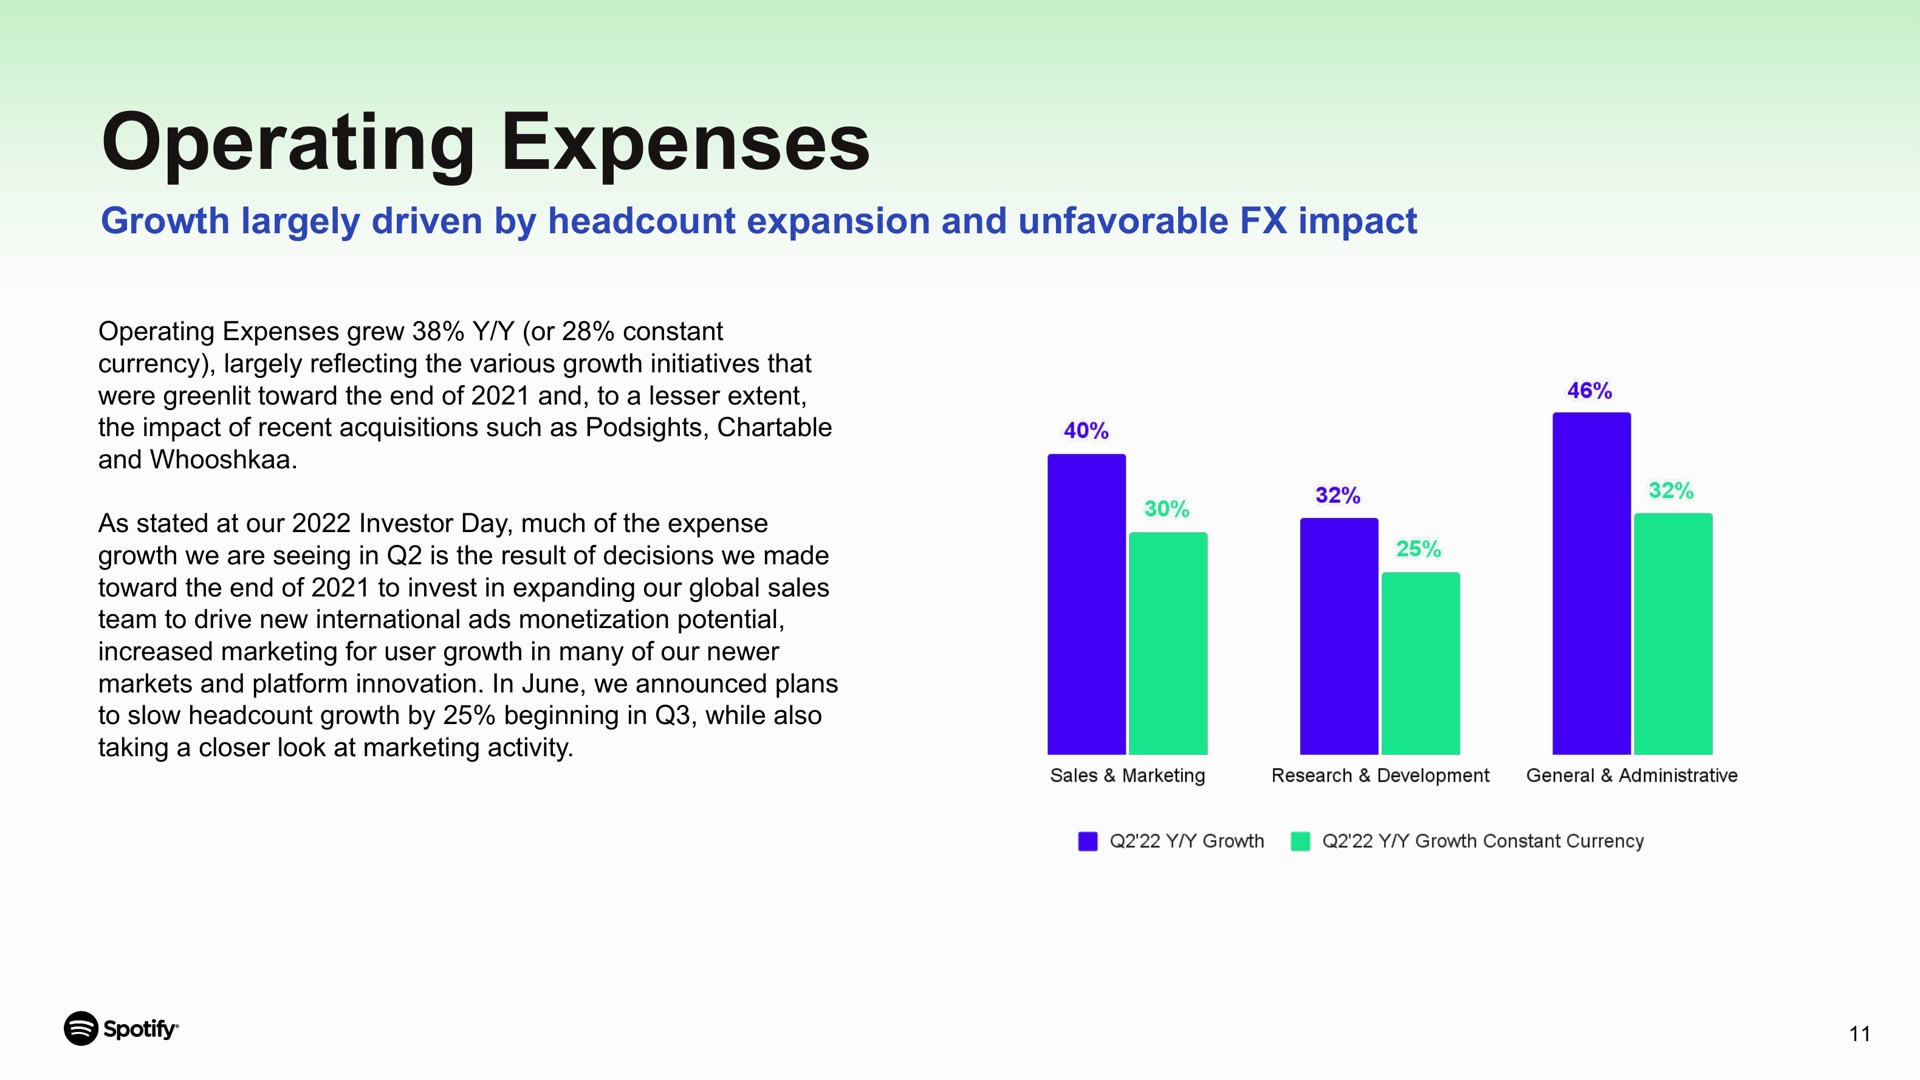 operating expenses growth largely driven by expansion and unfavorable impact were toward the end of to a lesser extent spotty | Spotify